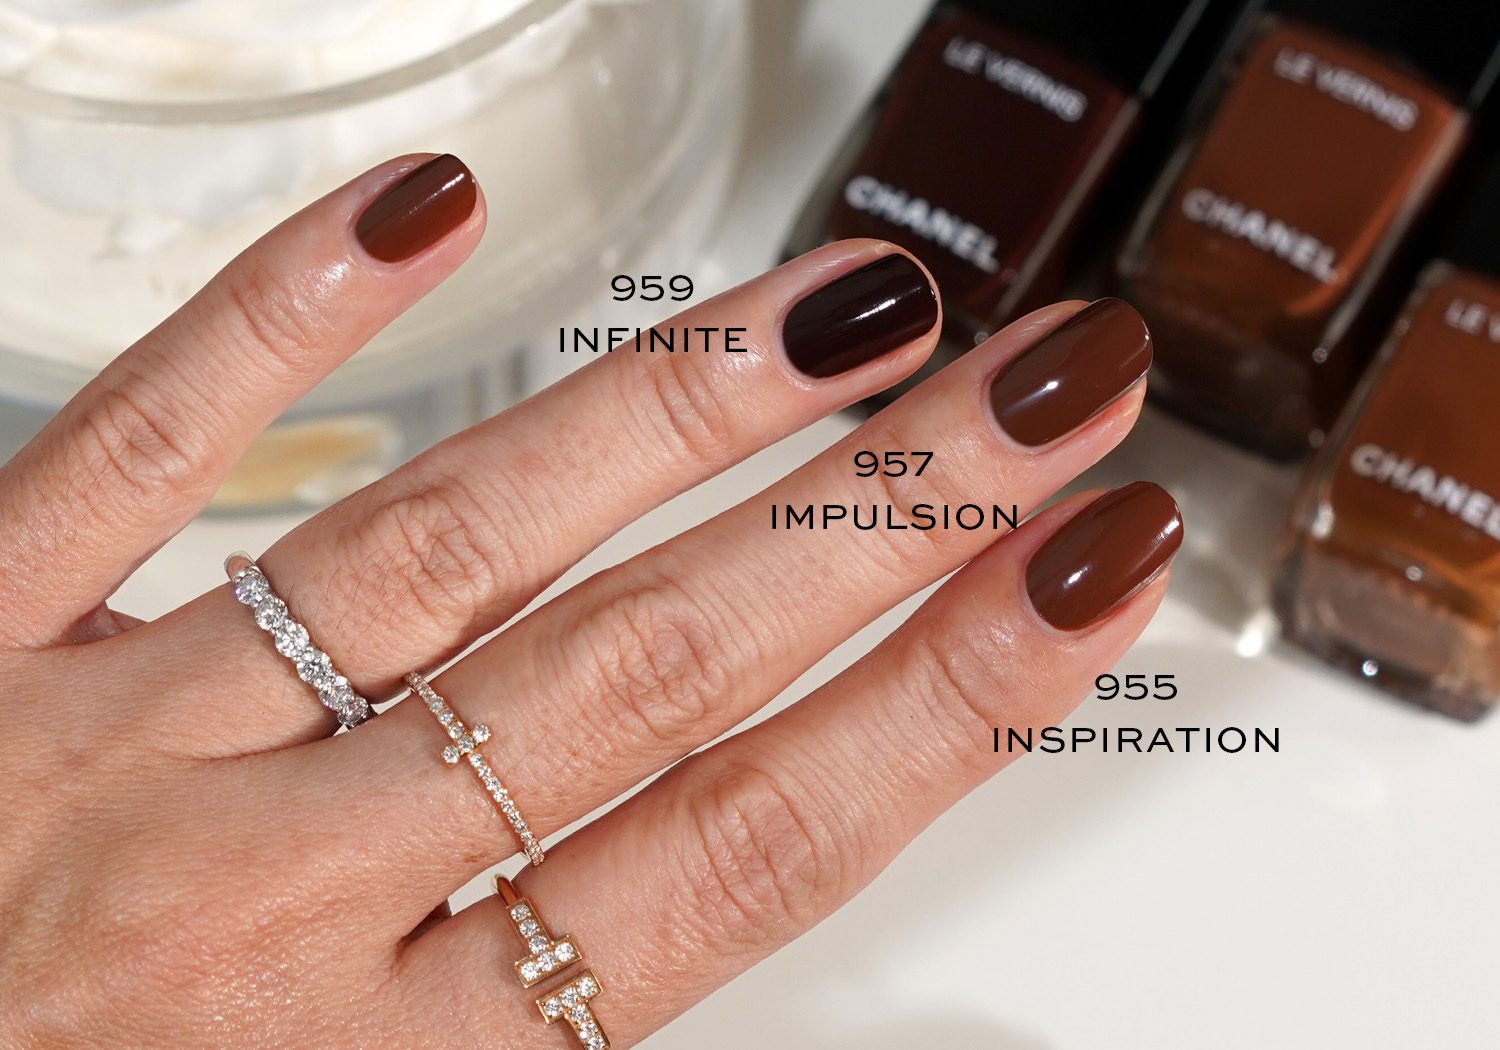 Indulge Your Nails In The Cosy Hot Chocolate Manicure Trend - HELLO! India